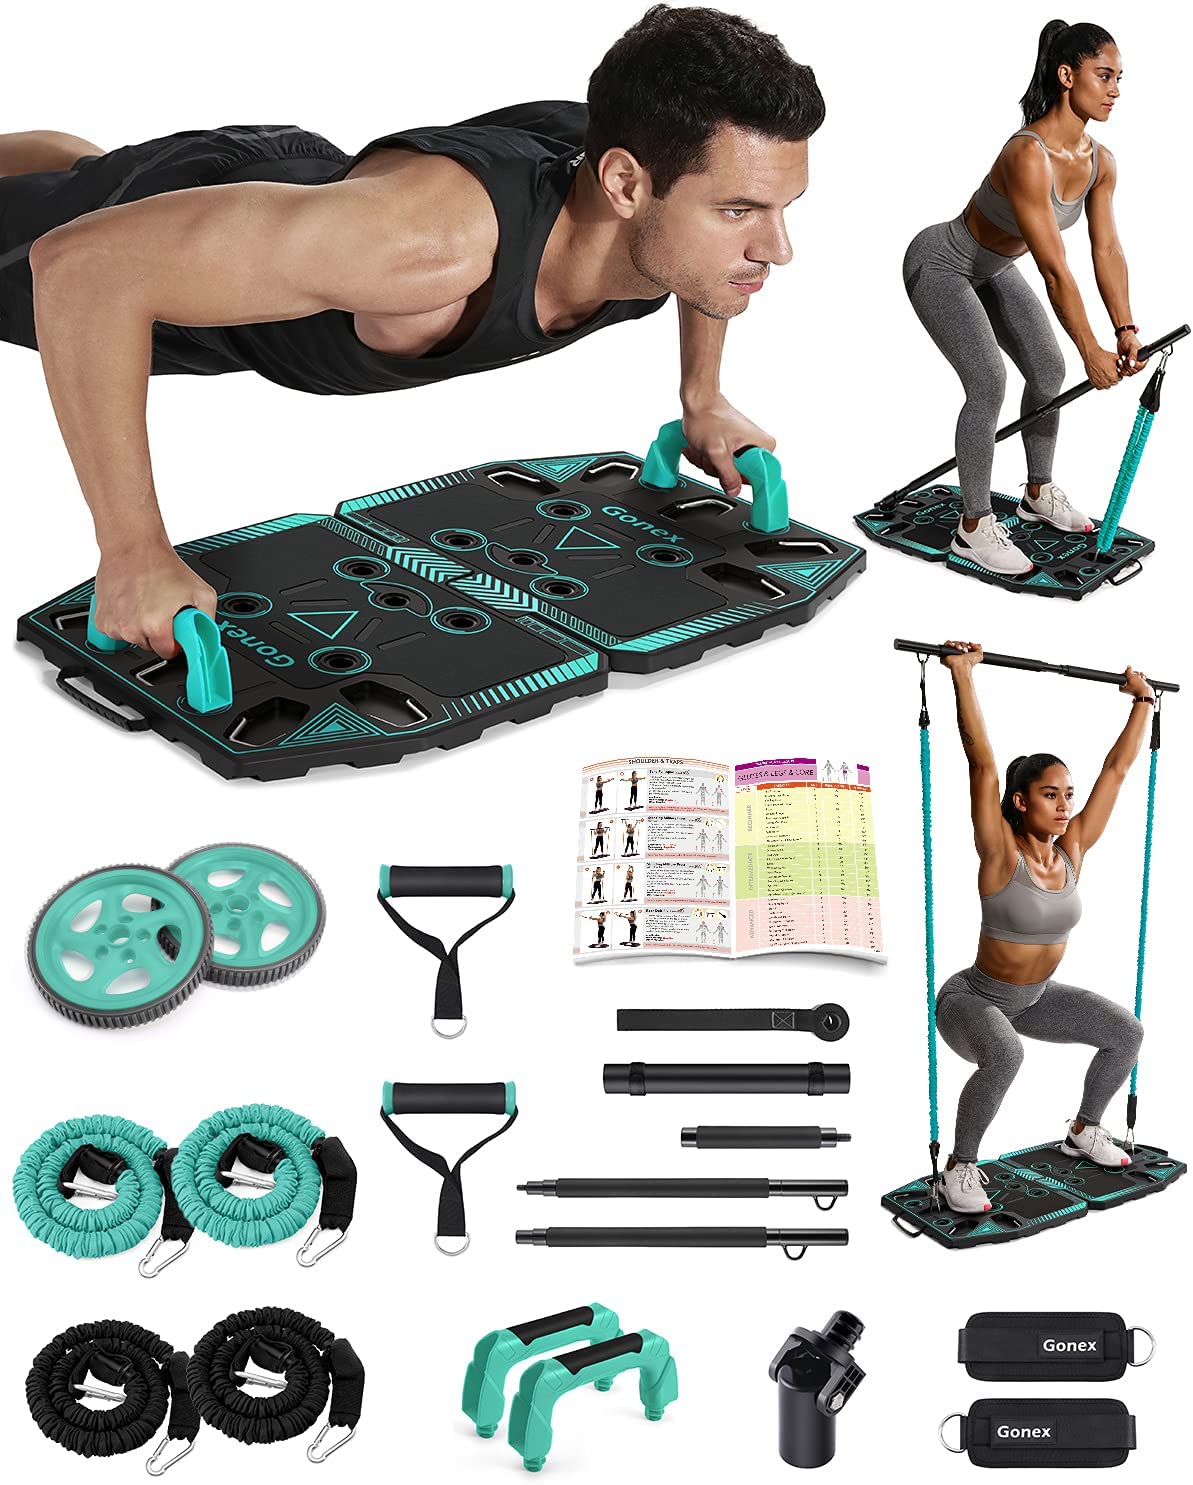 Home Gym Exercise Equipment - Portable Workout System 17 Fitness Accessories  9 I